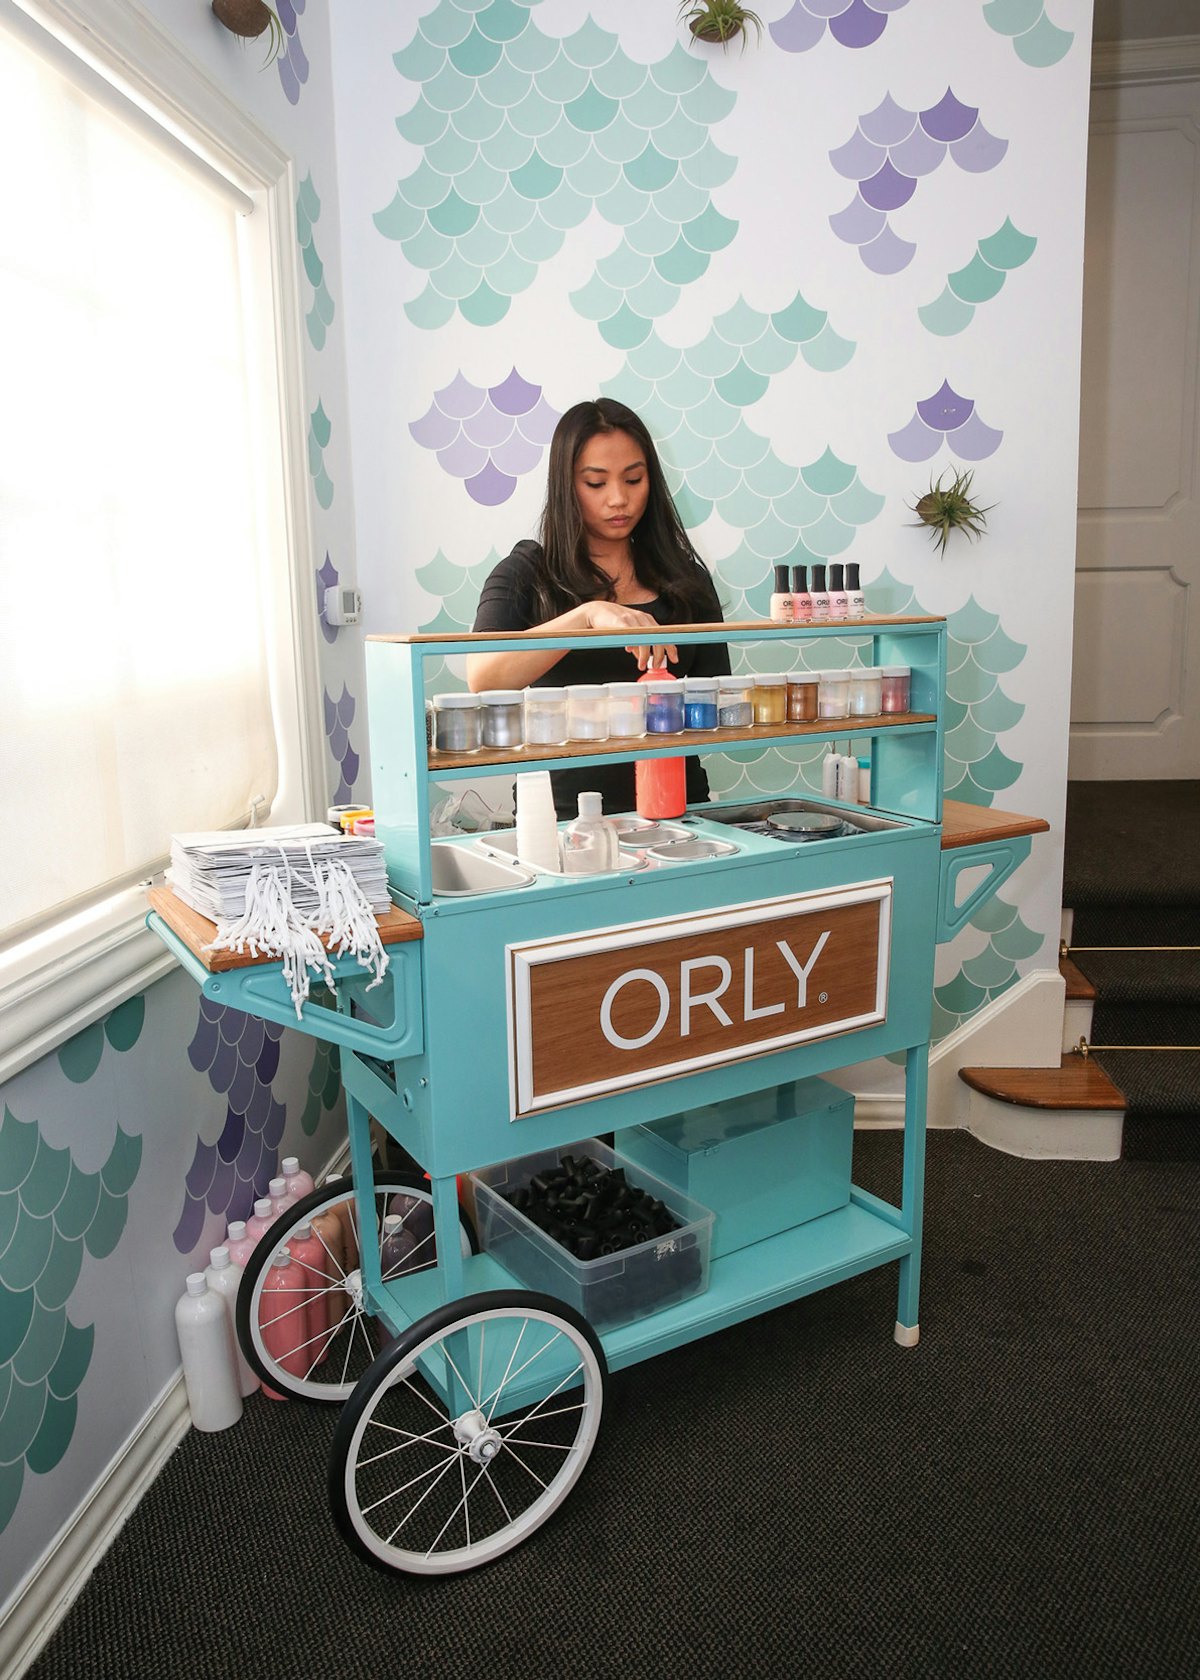 Orly Taps the Next Generation for Growth Nailpro 